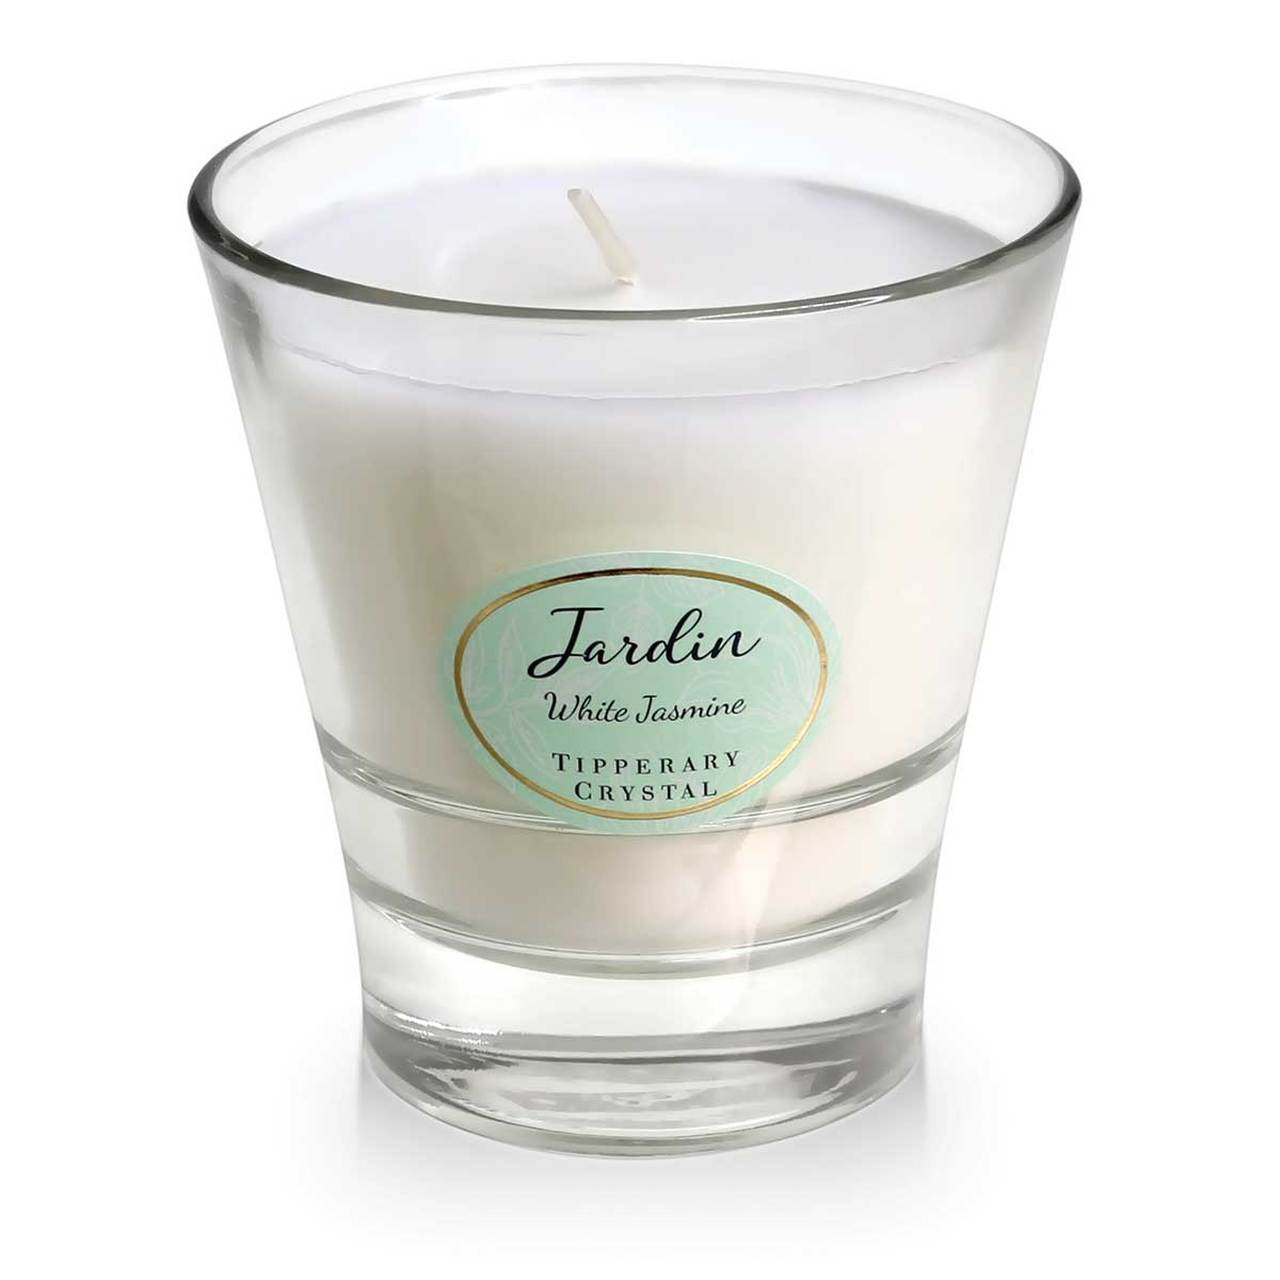 Tipperary Crystal White Jasmine Jardin Collection Candle